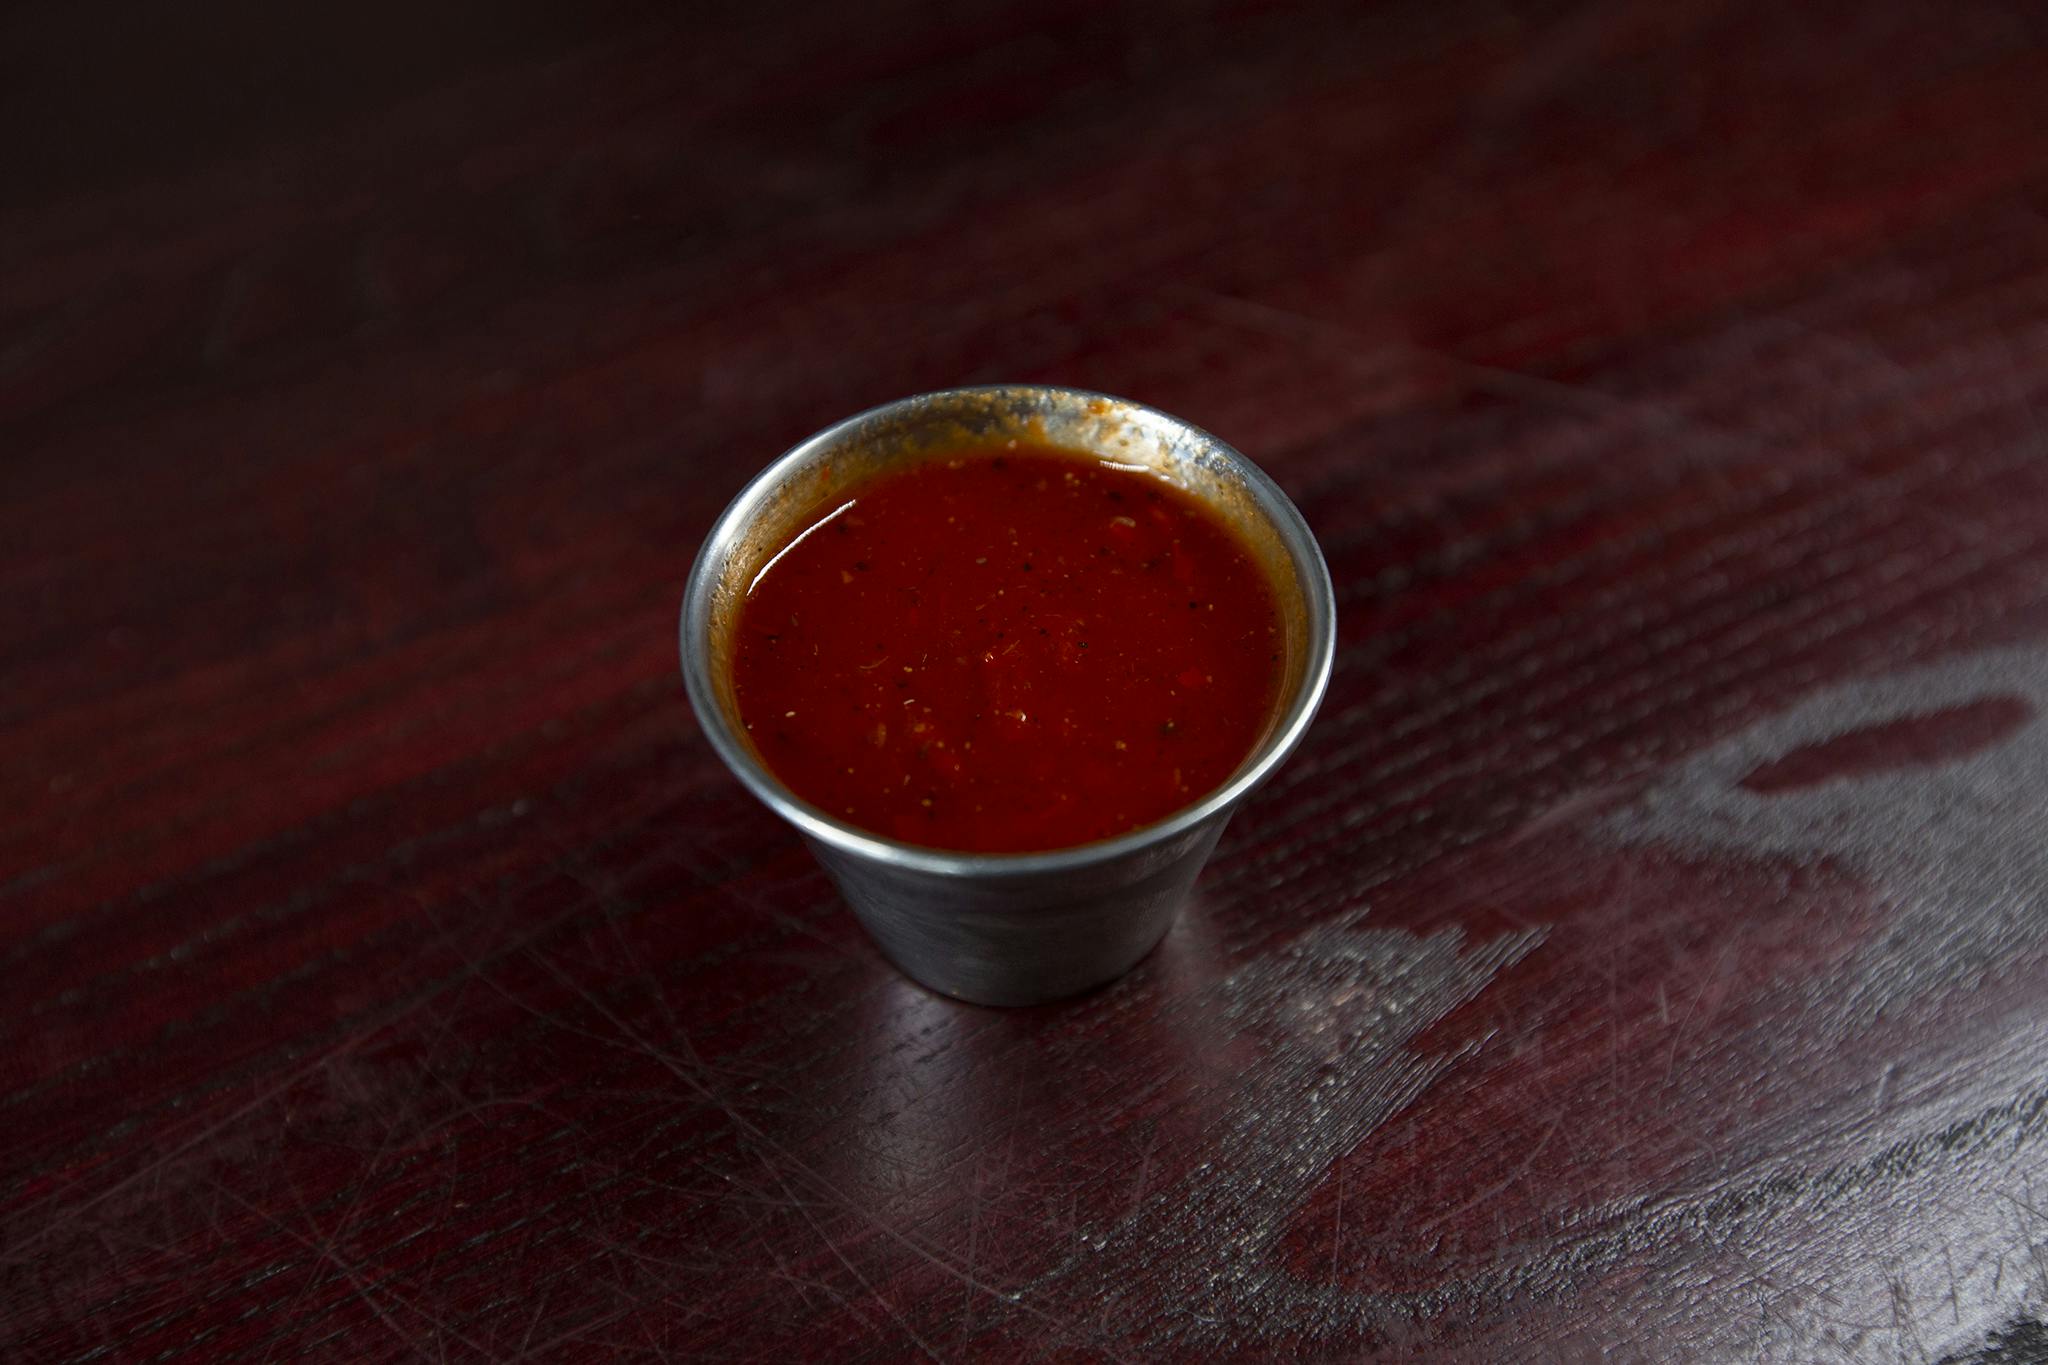 Side Salsa from Firehouse Grill - Chicago Ave in Evanston, IL